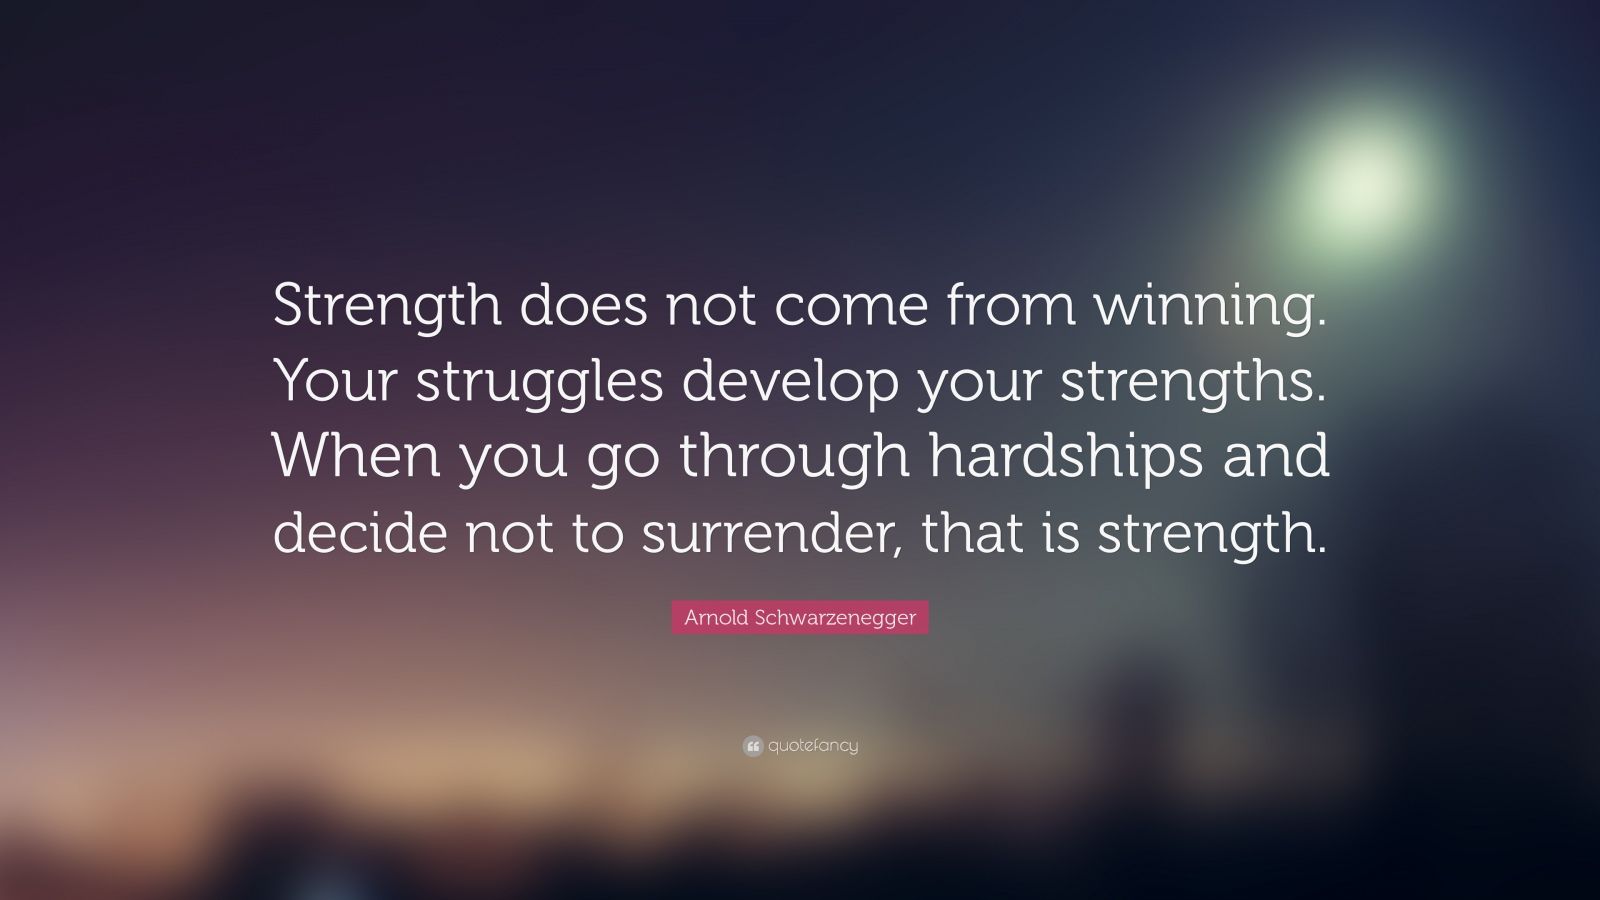 Arnold Schwarzenegger Quote: “Strength does not come from winning. Your ...